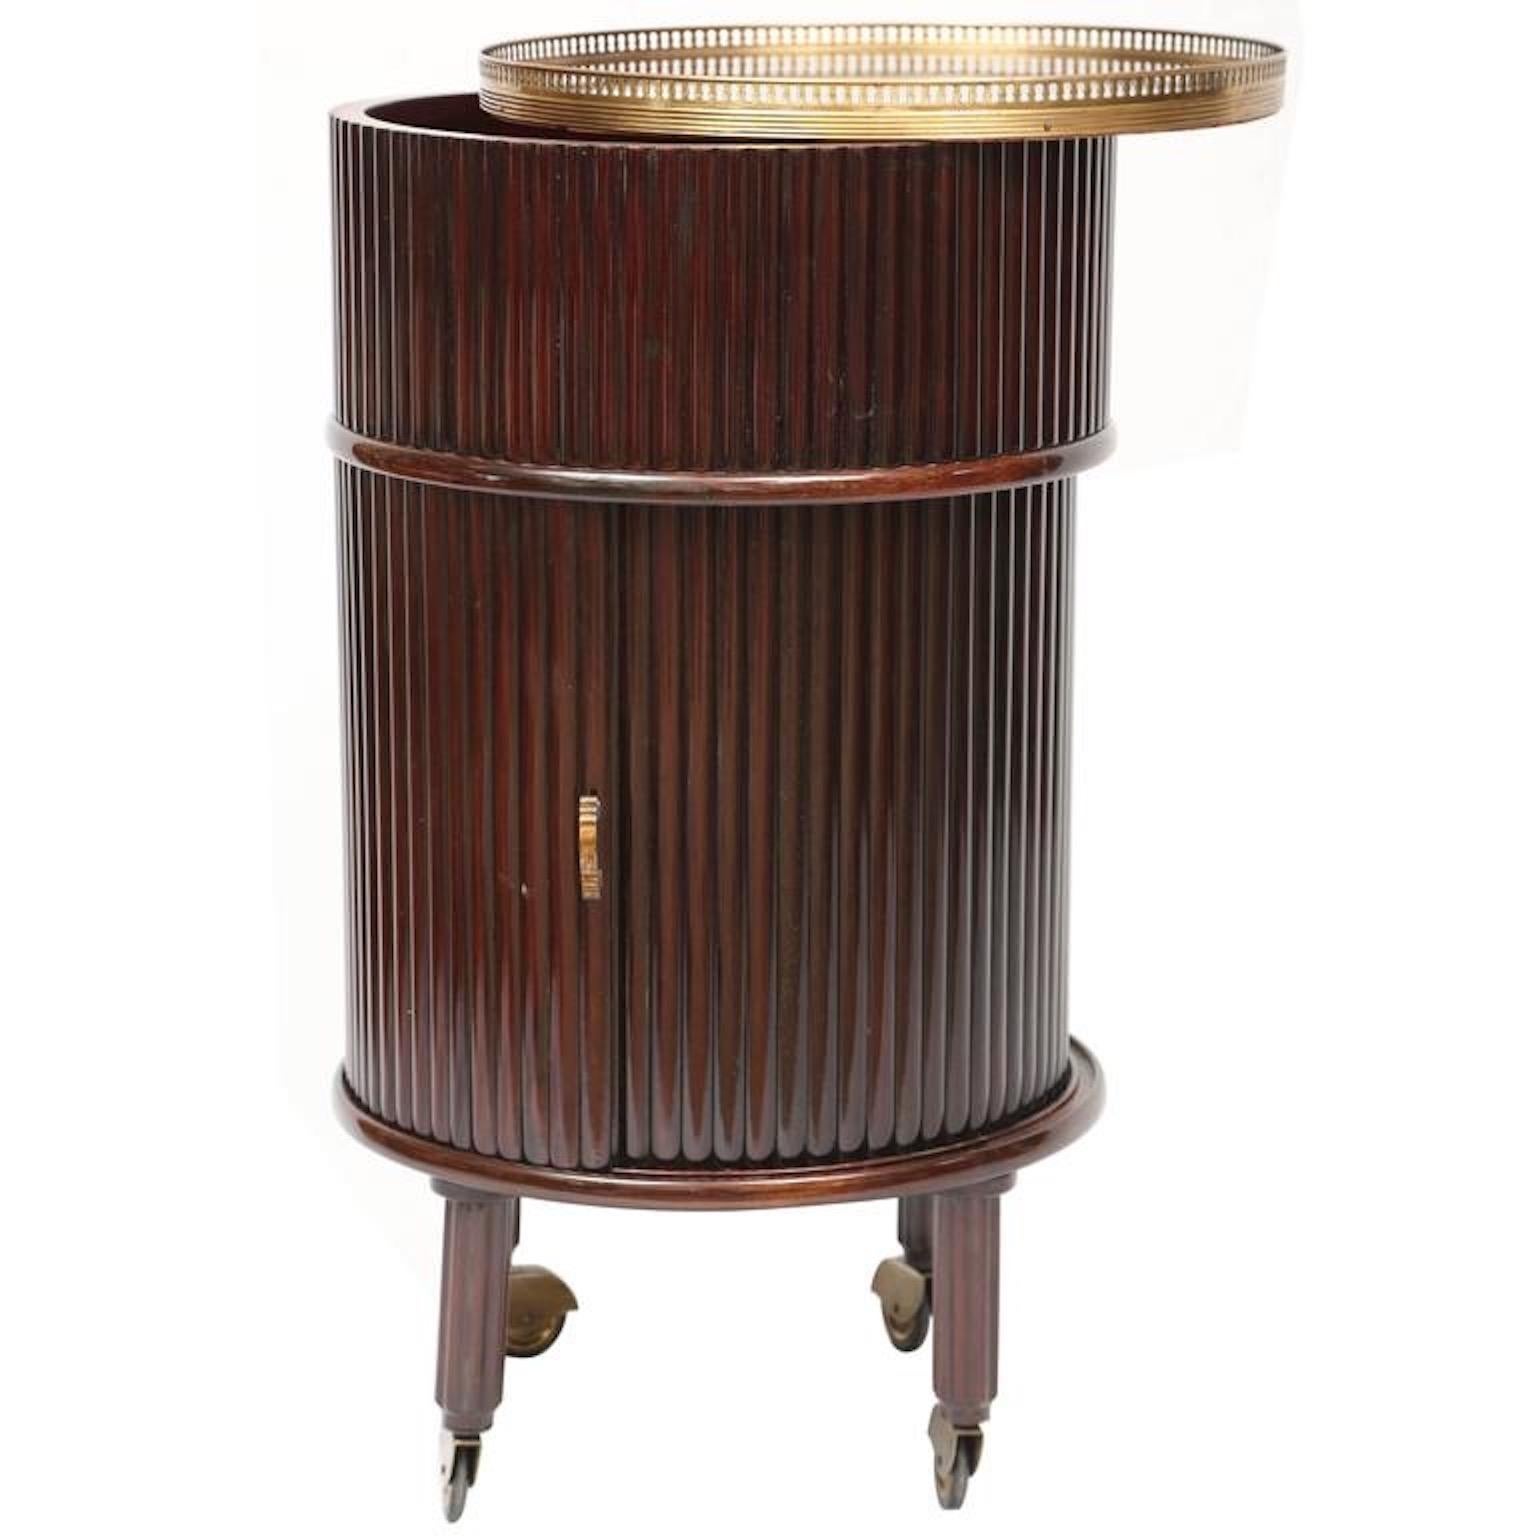 Osvaldo Borsani style 1950s Italian columnar form rolling cocktail cabinet in reeded grizzinato vertical strips of mahogany and matching tambour door which opens to reveal a circular compartment lined with red velvet and a Lazy Susan with slots to